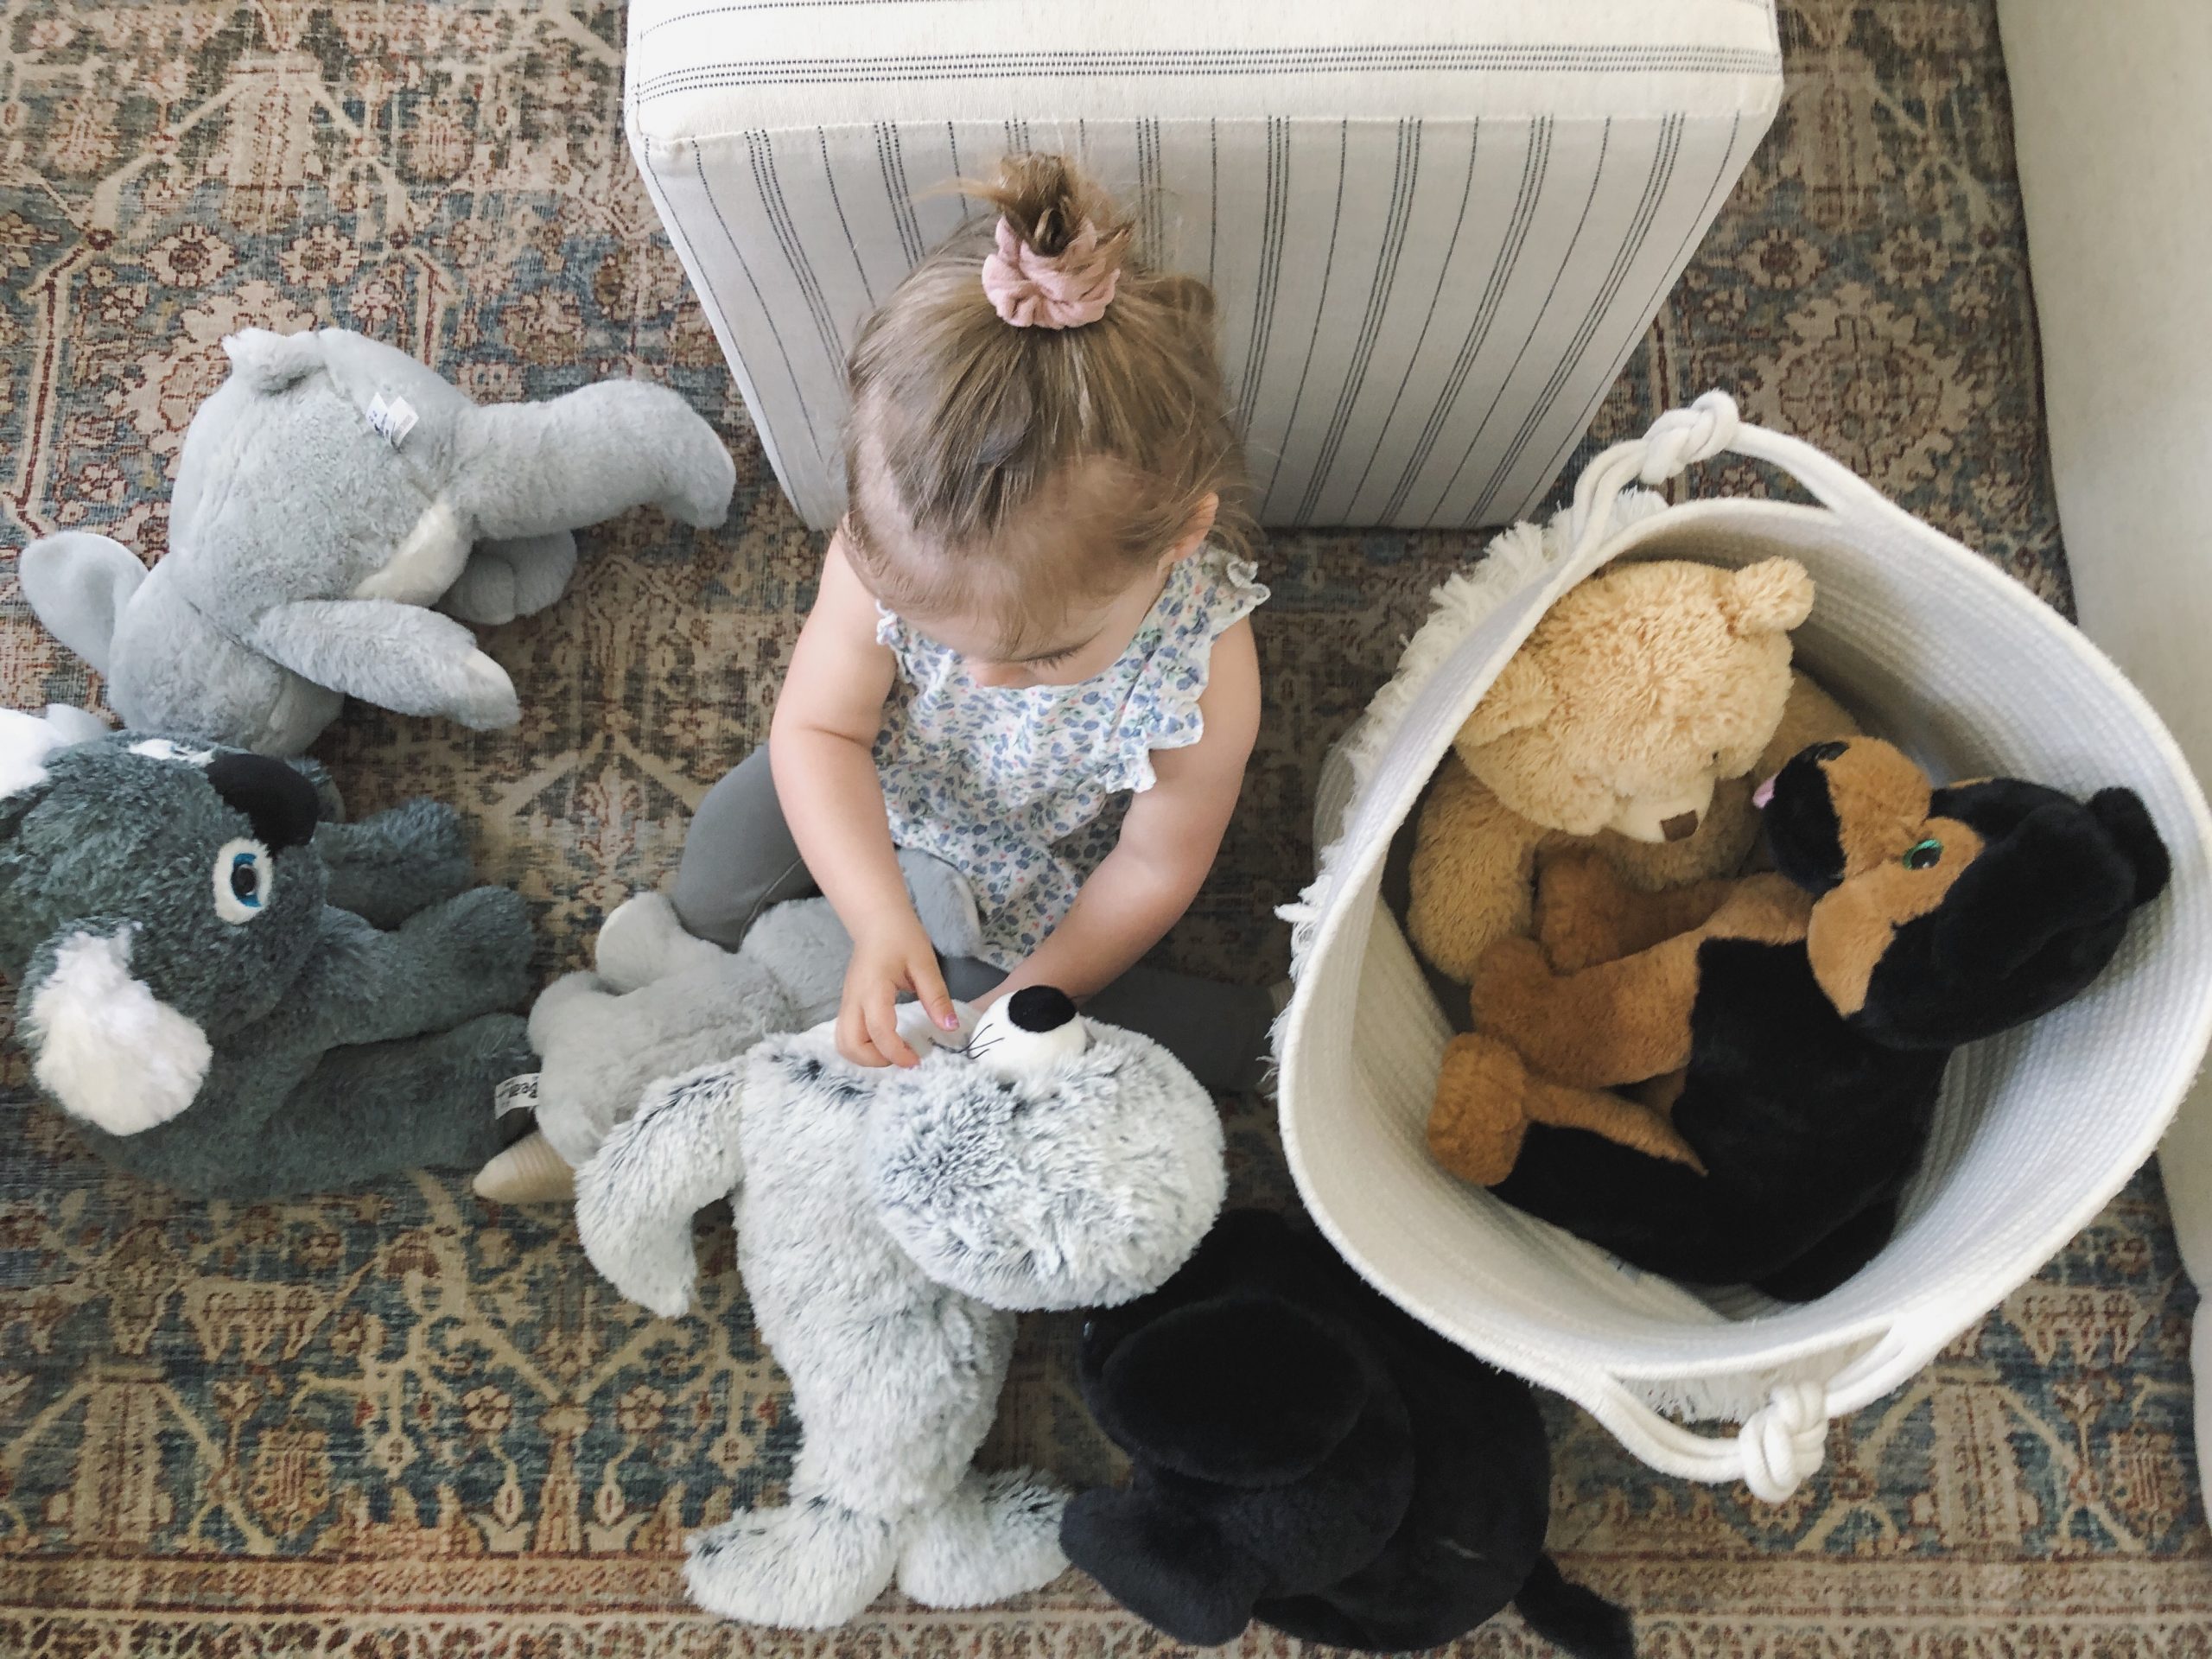 Child sitting on floor surrounding by plush animal toys. Check out careers with The Bear Factory.